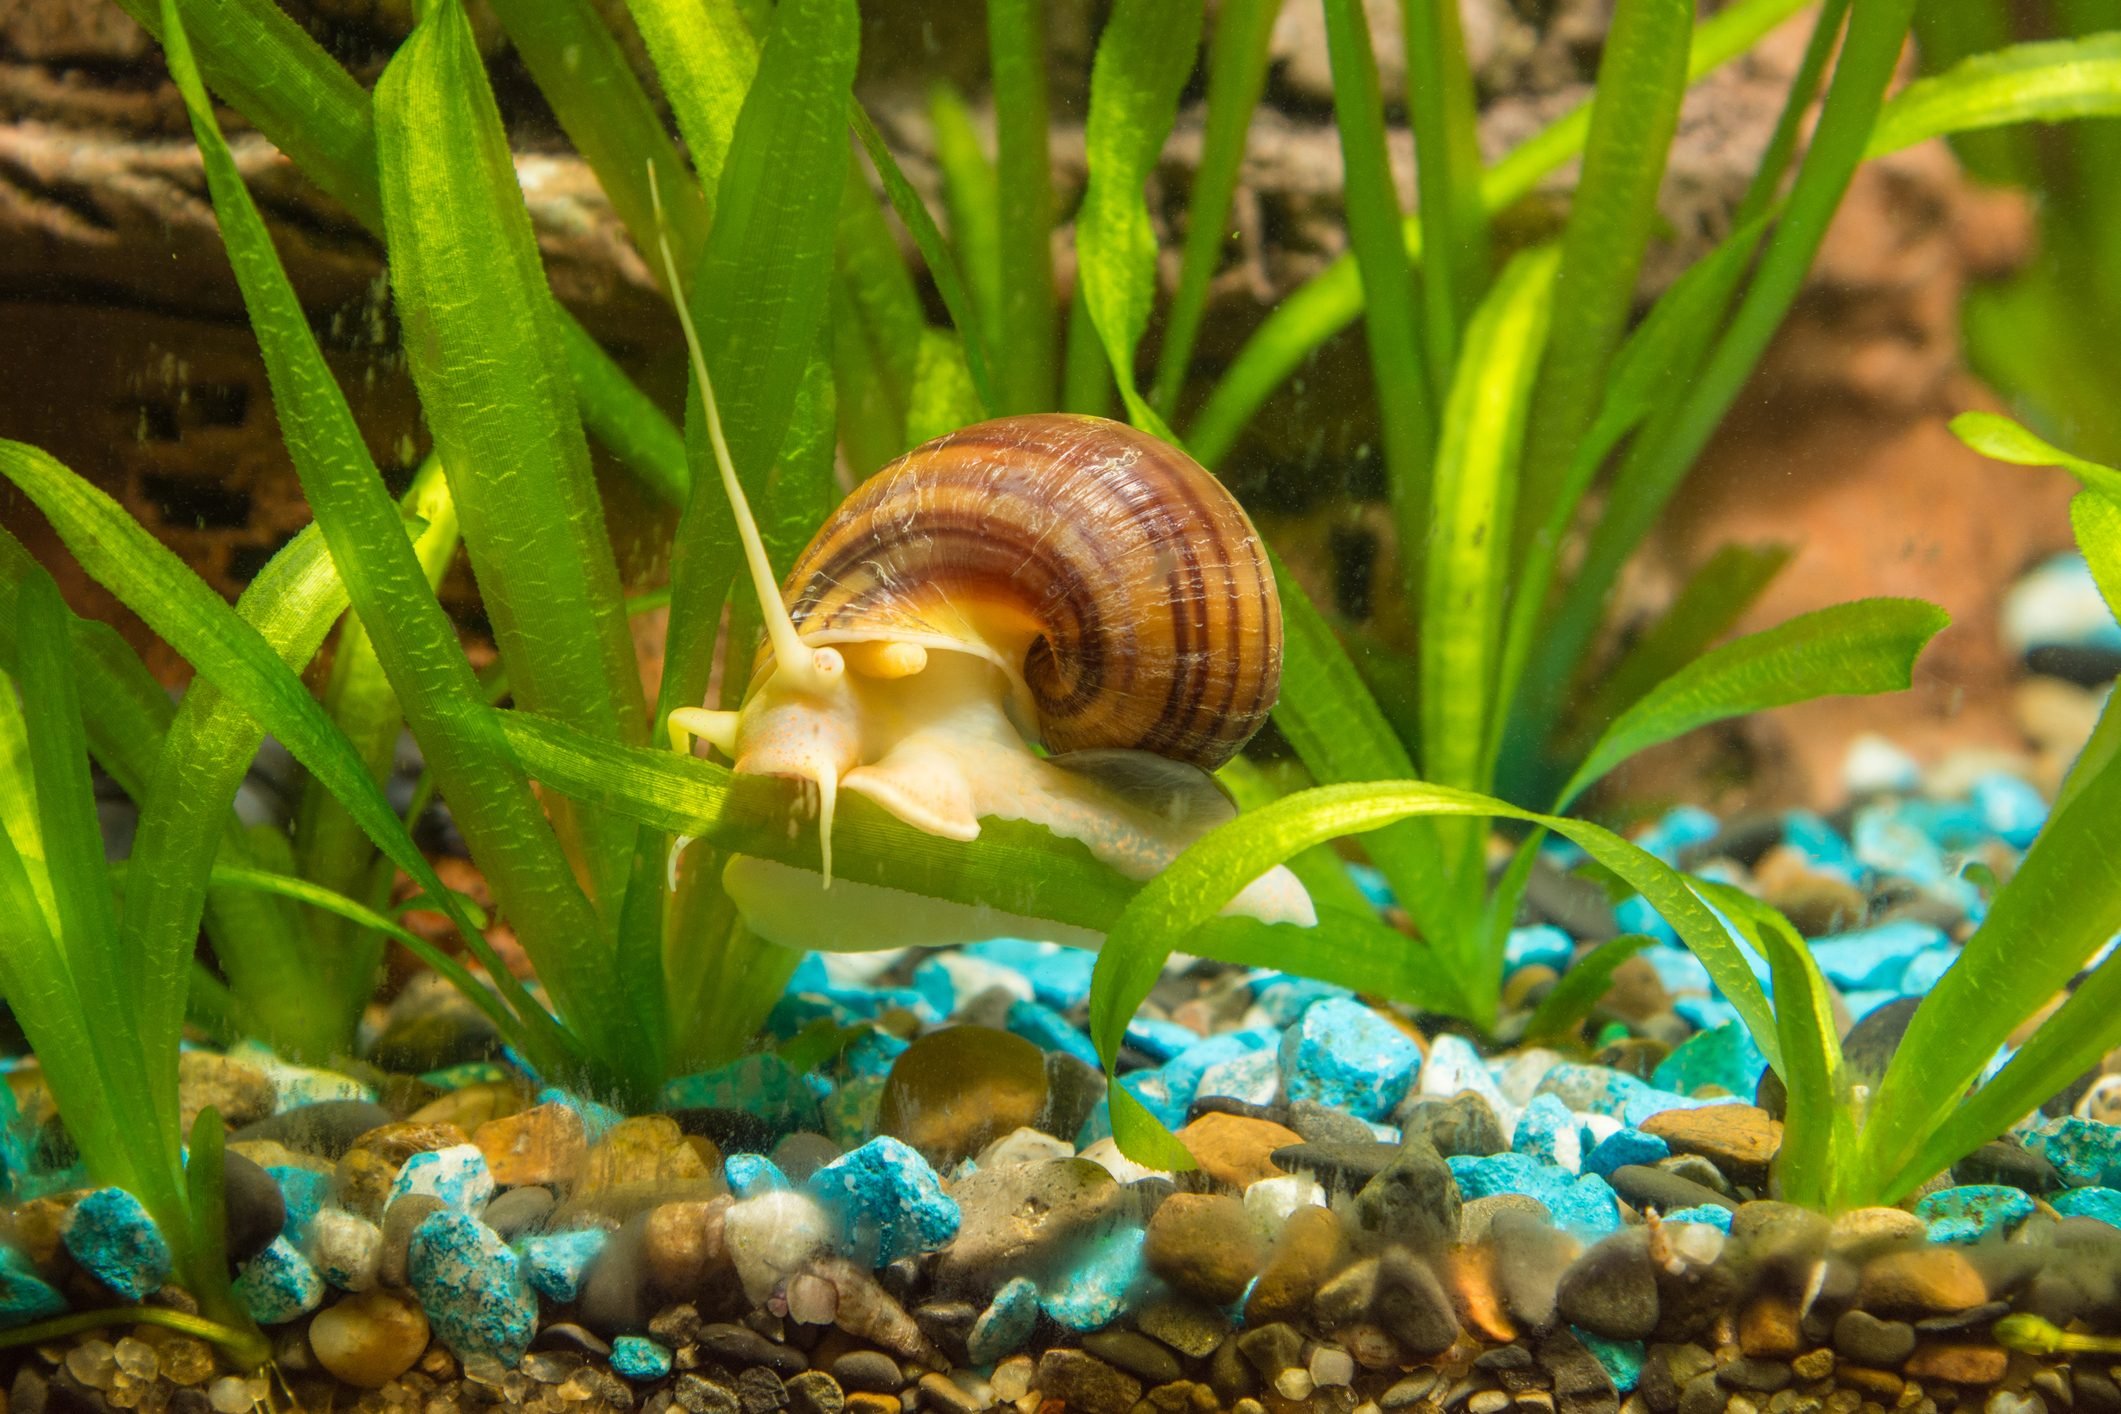 How To Get Rid of Snails In an Aquarium